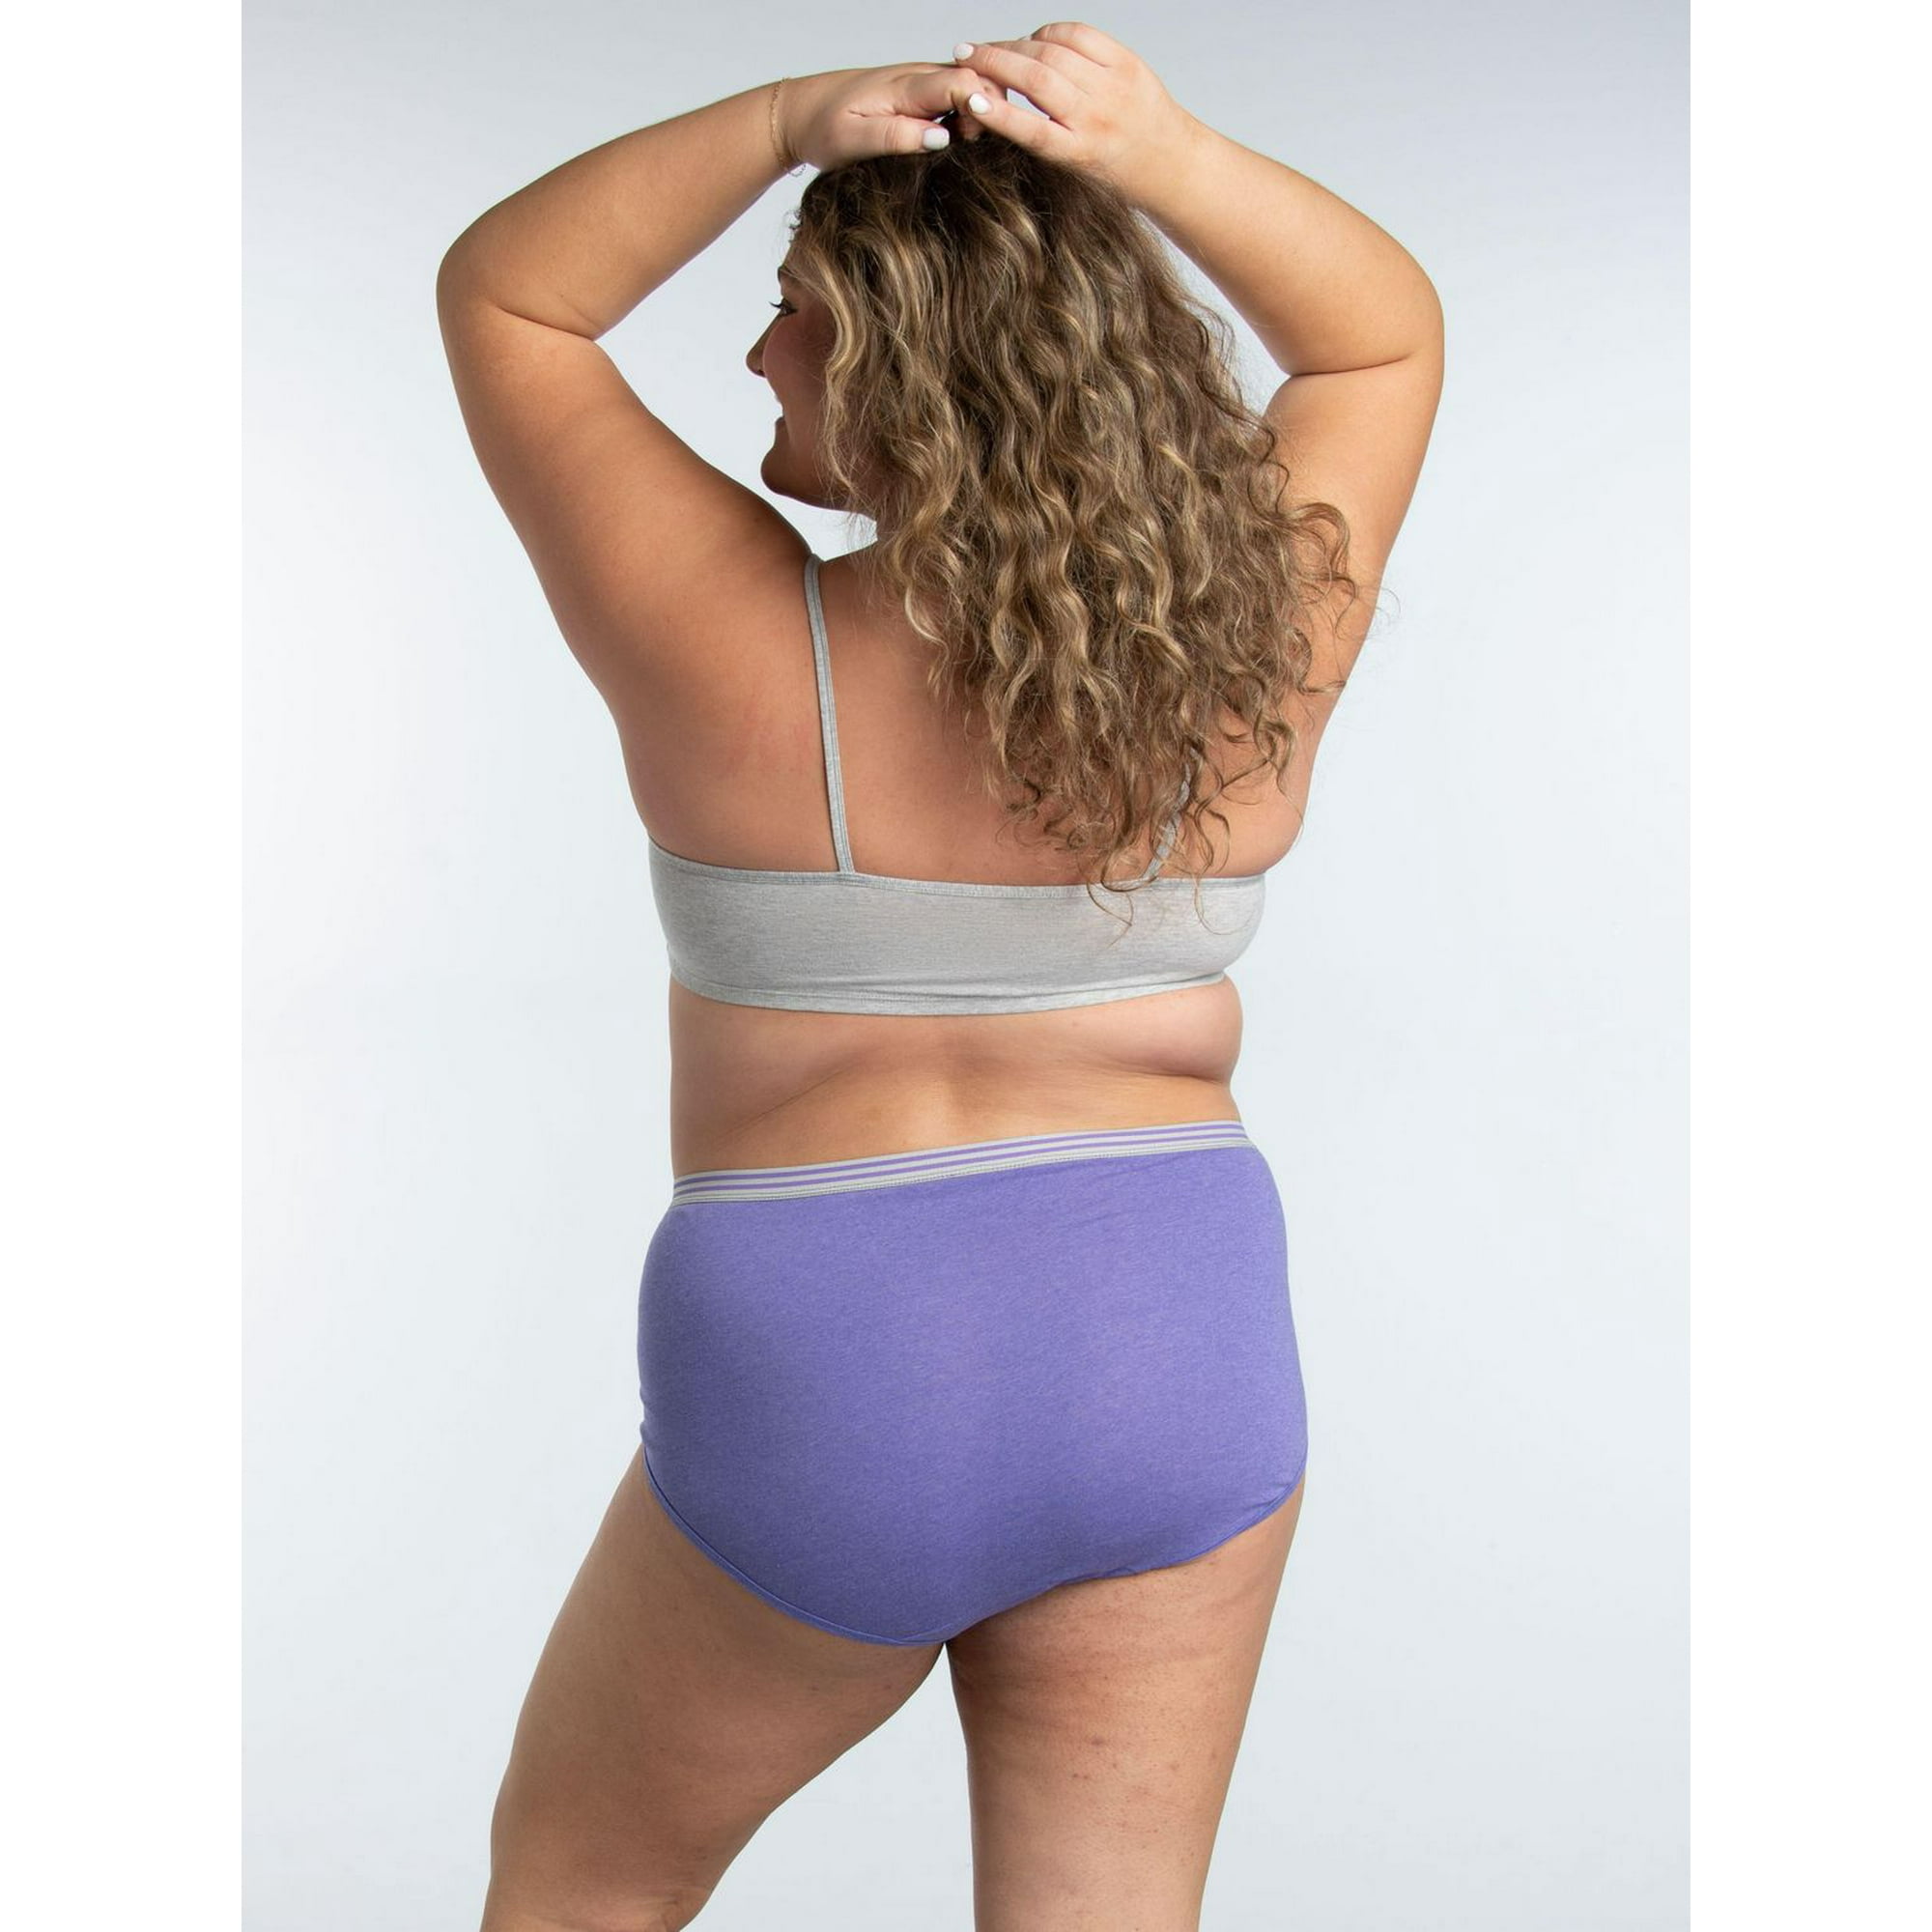 Fit for Me by Fruit of the Loom : Panties & Underwear for Women